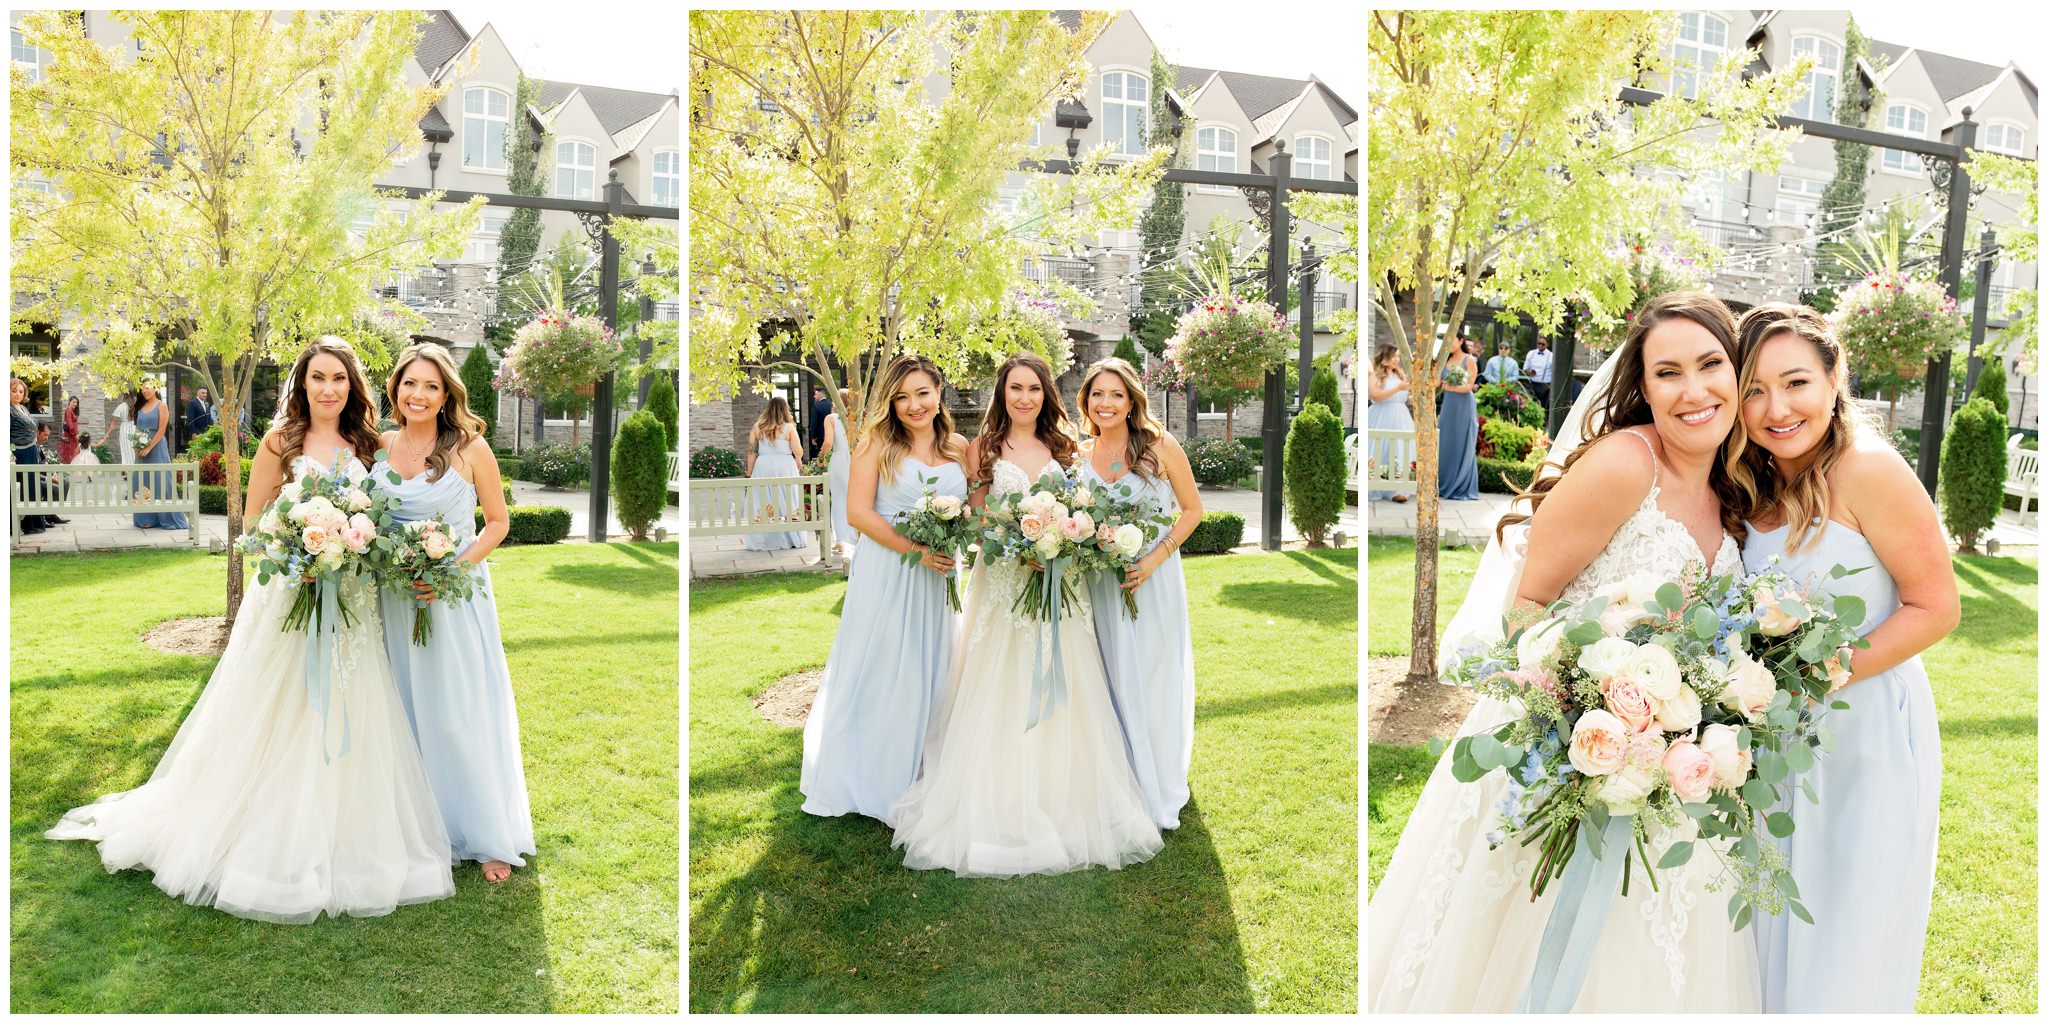 Bride with her bridesmaids who are wearing blue dresses